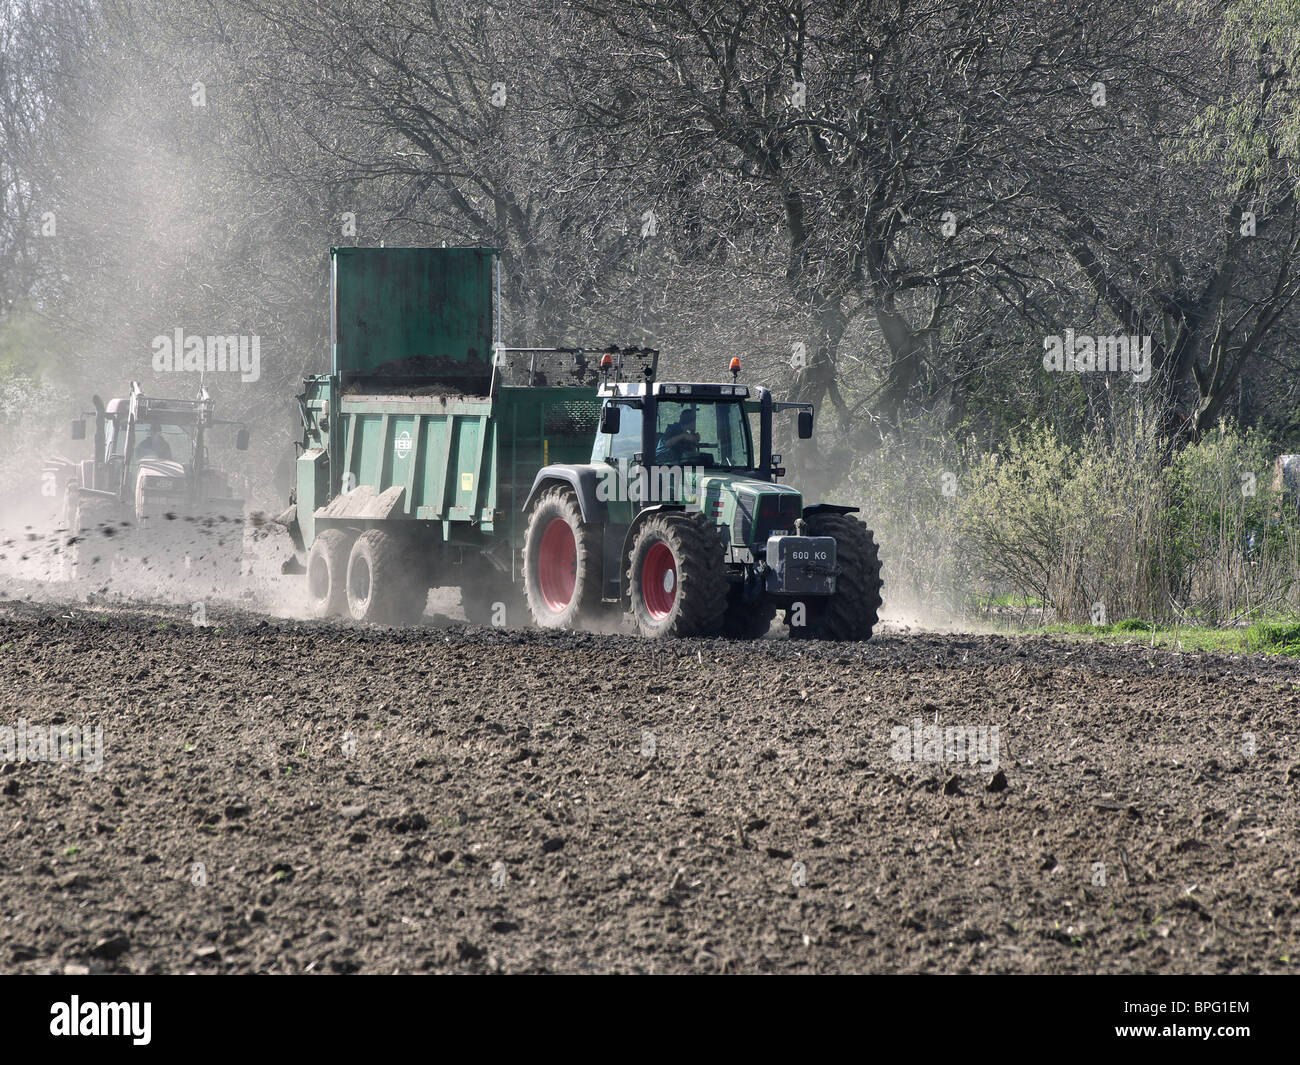 Farmer with his tractor manuring his acre near Barum, Elbmarsch, Germany. Stock Photo